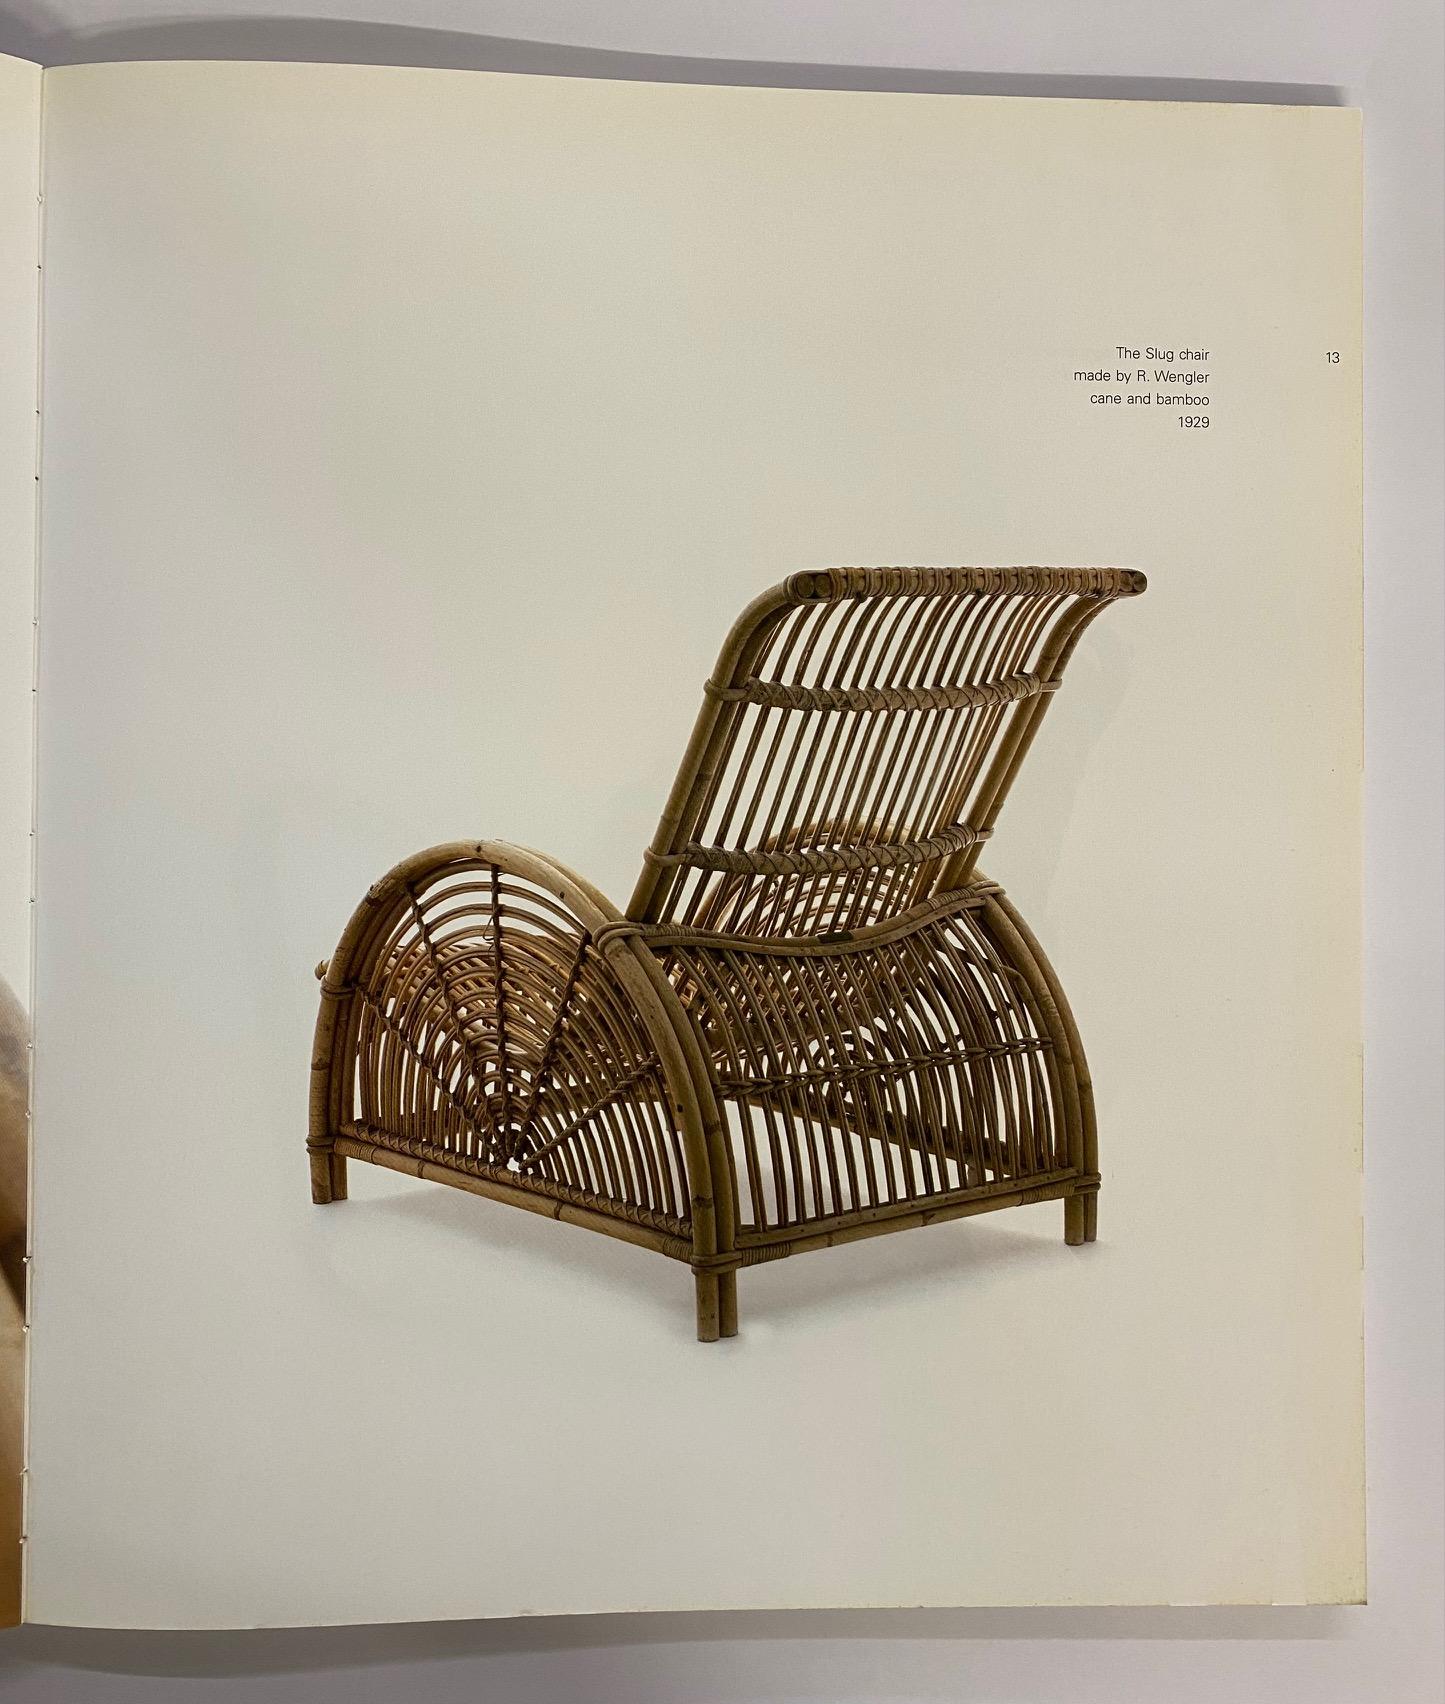 A first edition soft cover published in 2002, with an introduction by Carsten Thau and Kjeld Vindum followed with an essay by Marie-Louise Jensen and Maria Wettergren and 80 pages of photographs of furniture designs with brief descriptions.
Arne